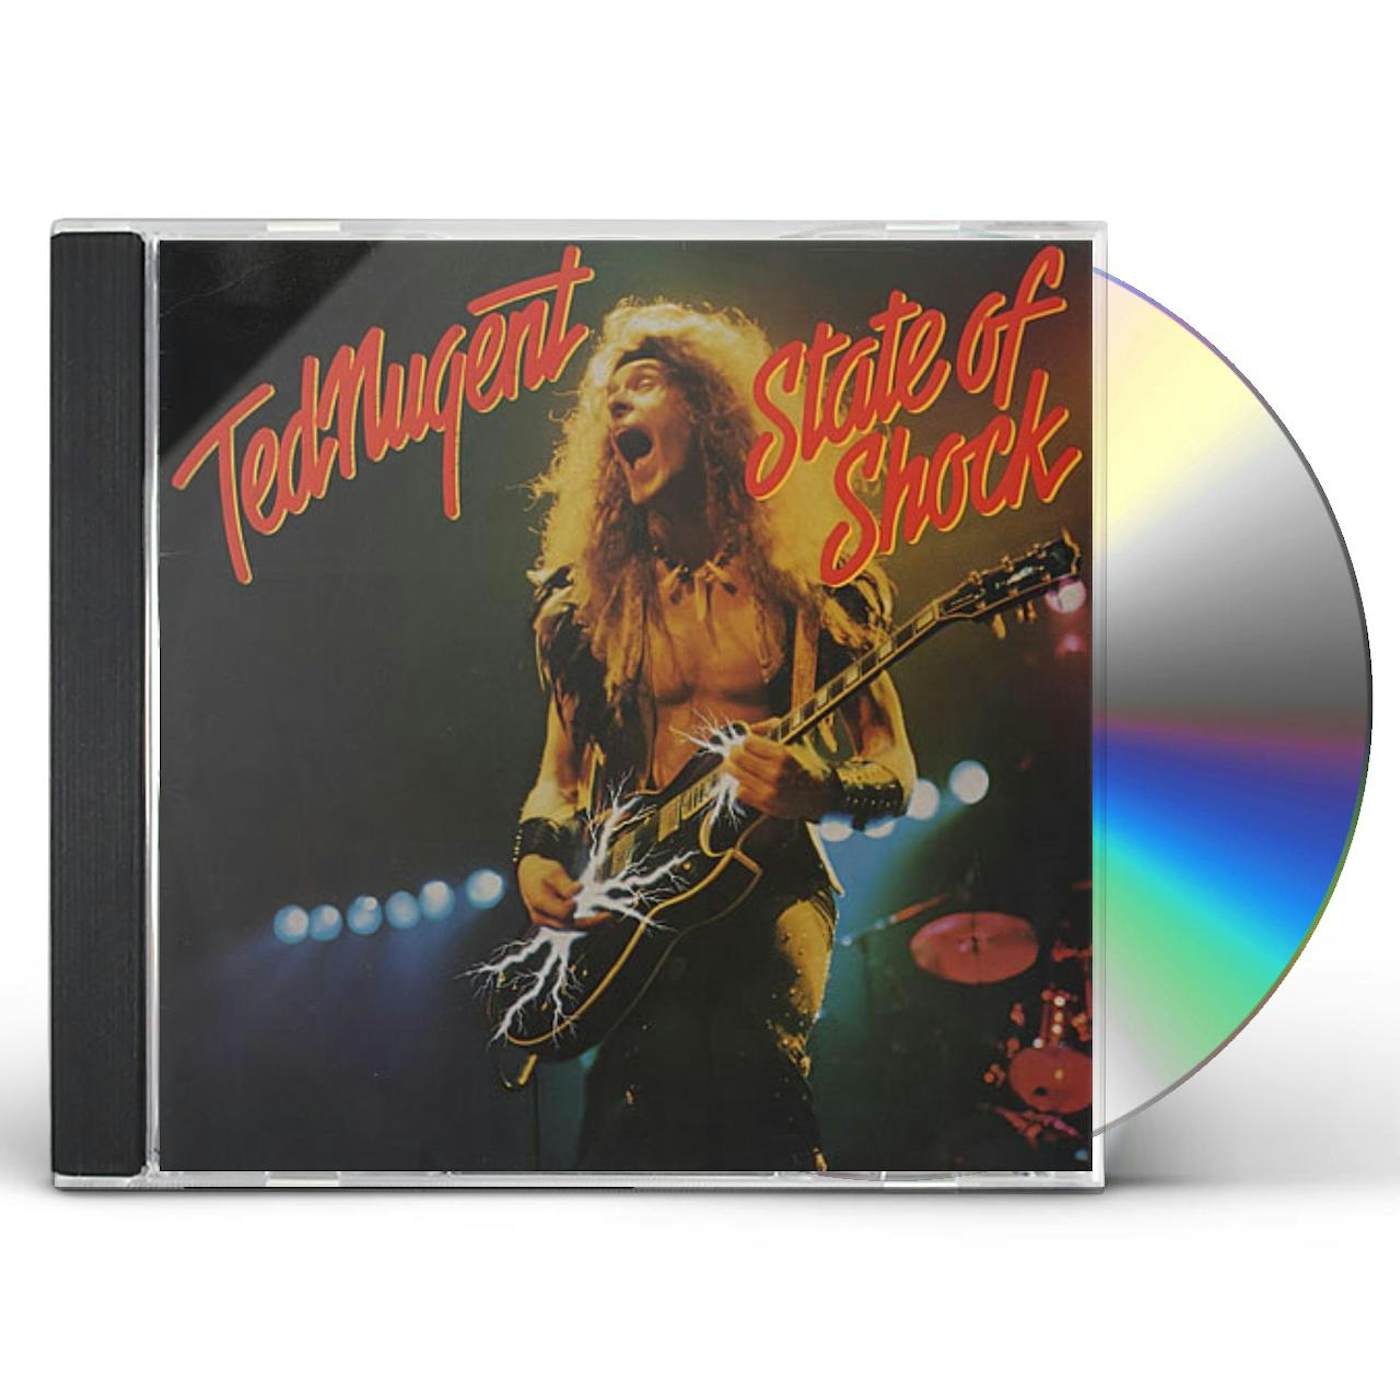 Ted Nugent STATE OF SHOCK CD